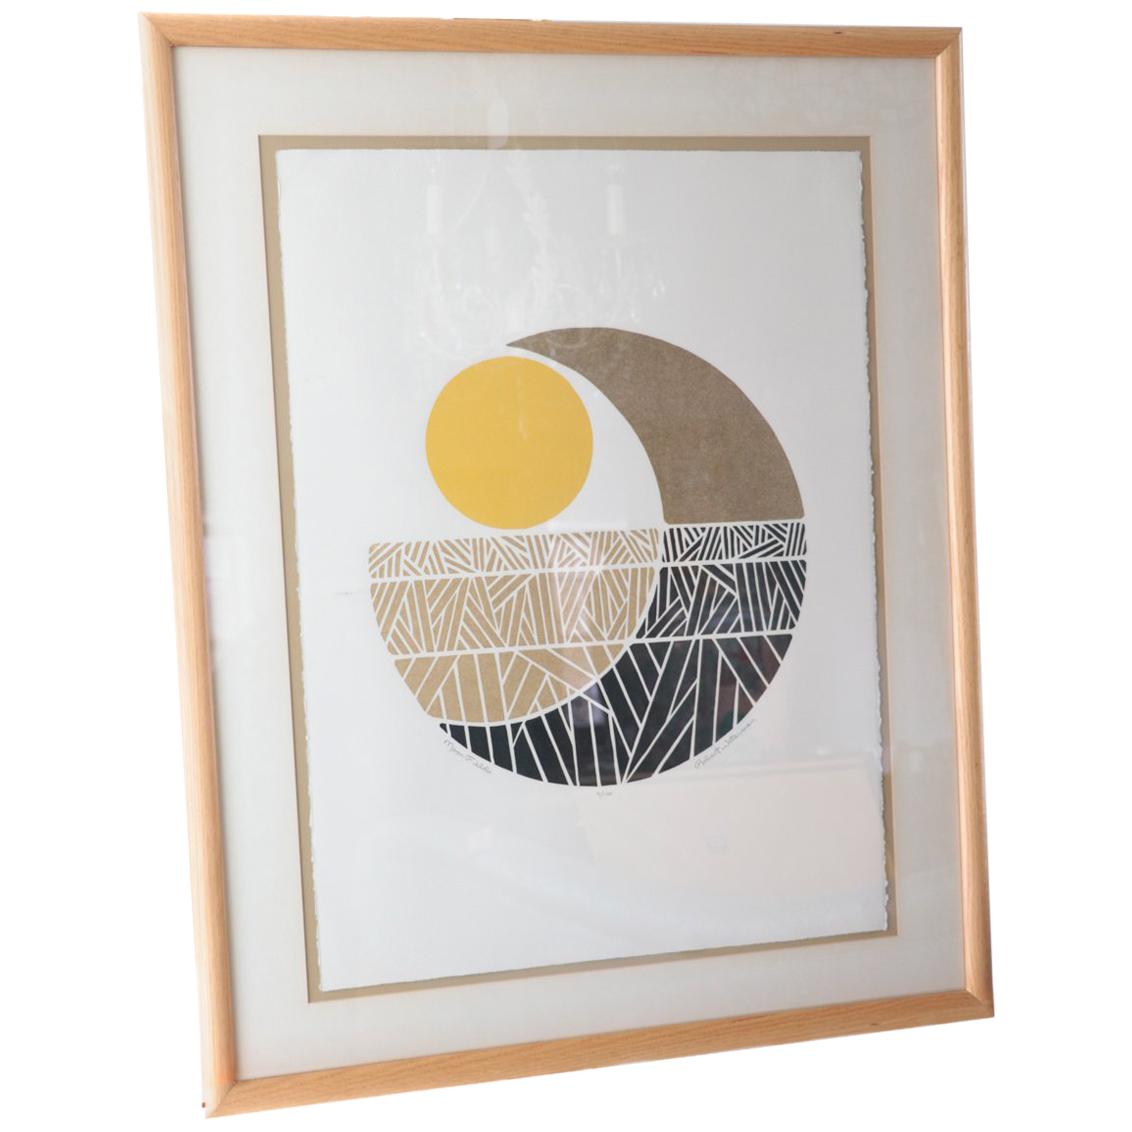 Signed Robert Waterman "Moon Fields" 4/100 Art. College and Litho Abstract For Sale